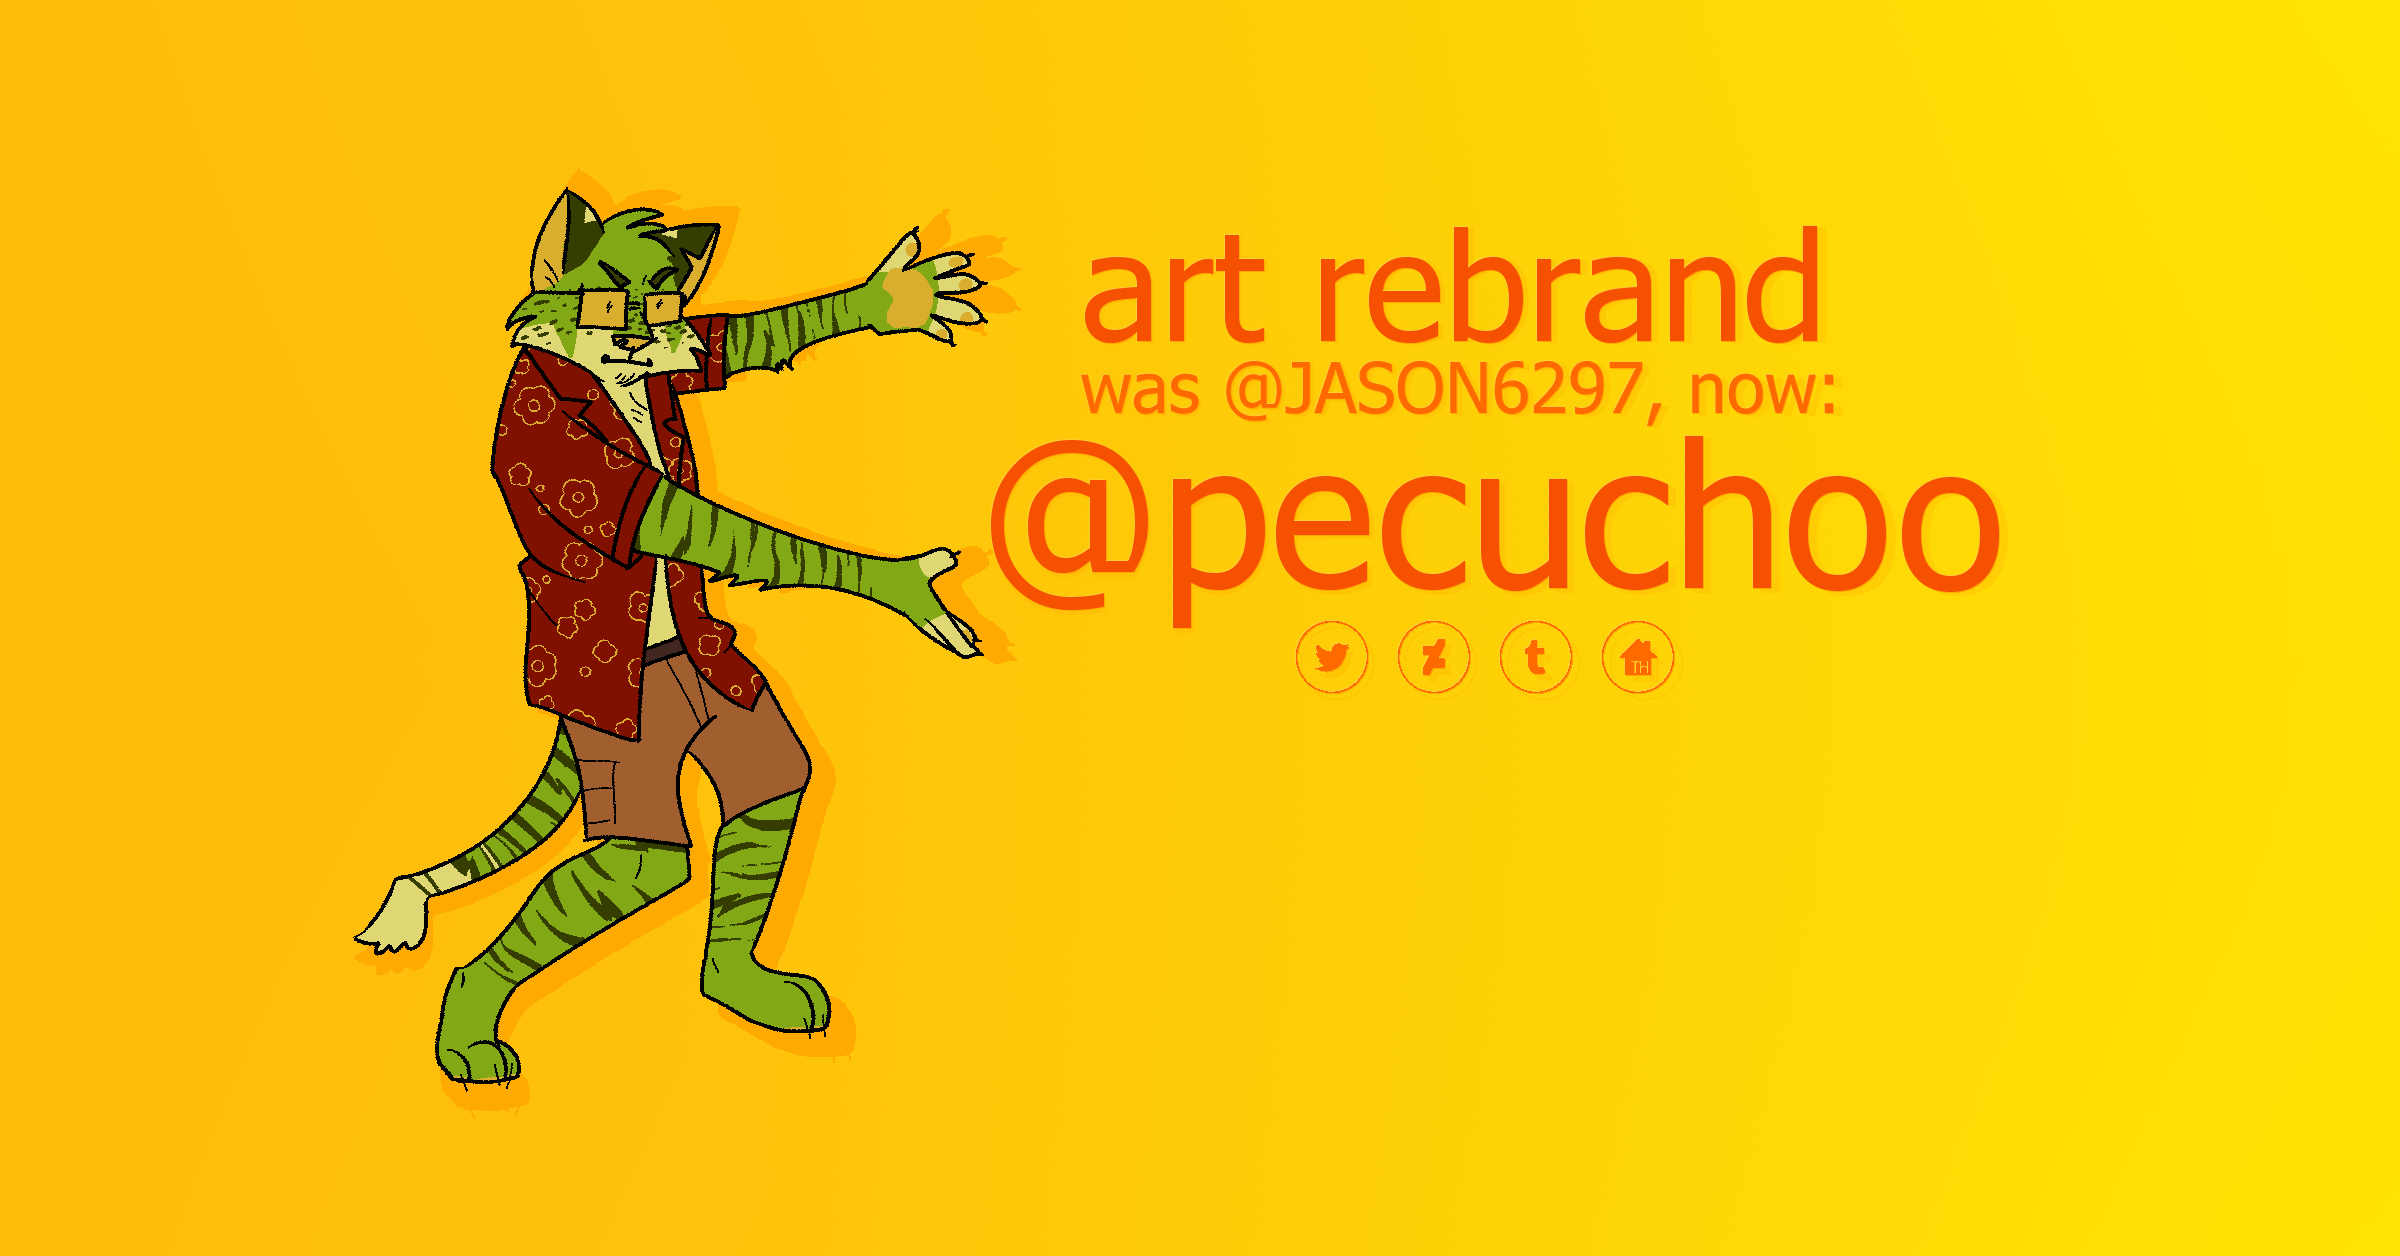 art rebrand announcement banner. username has changed from jason6297 to pecuchoo across all social media platforms